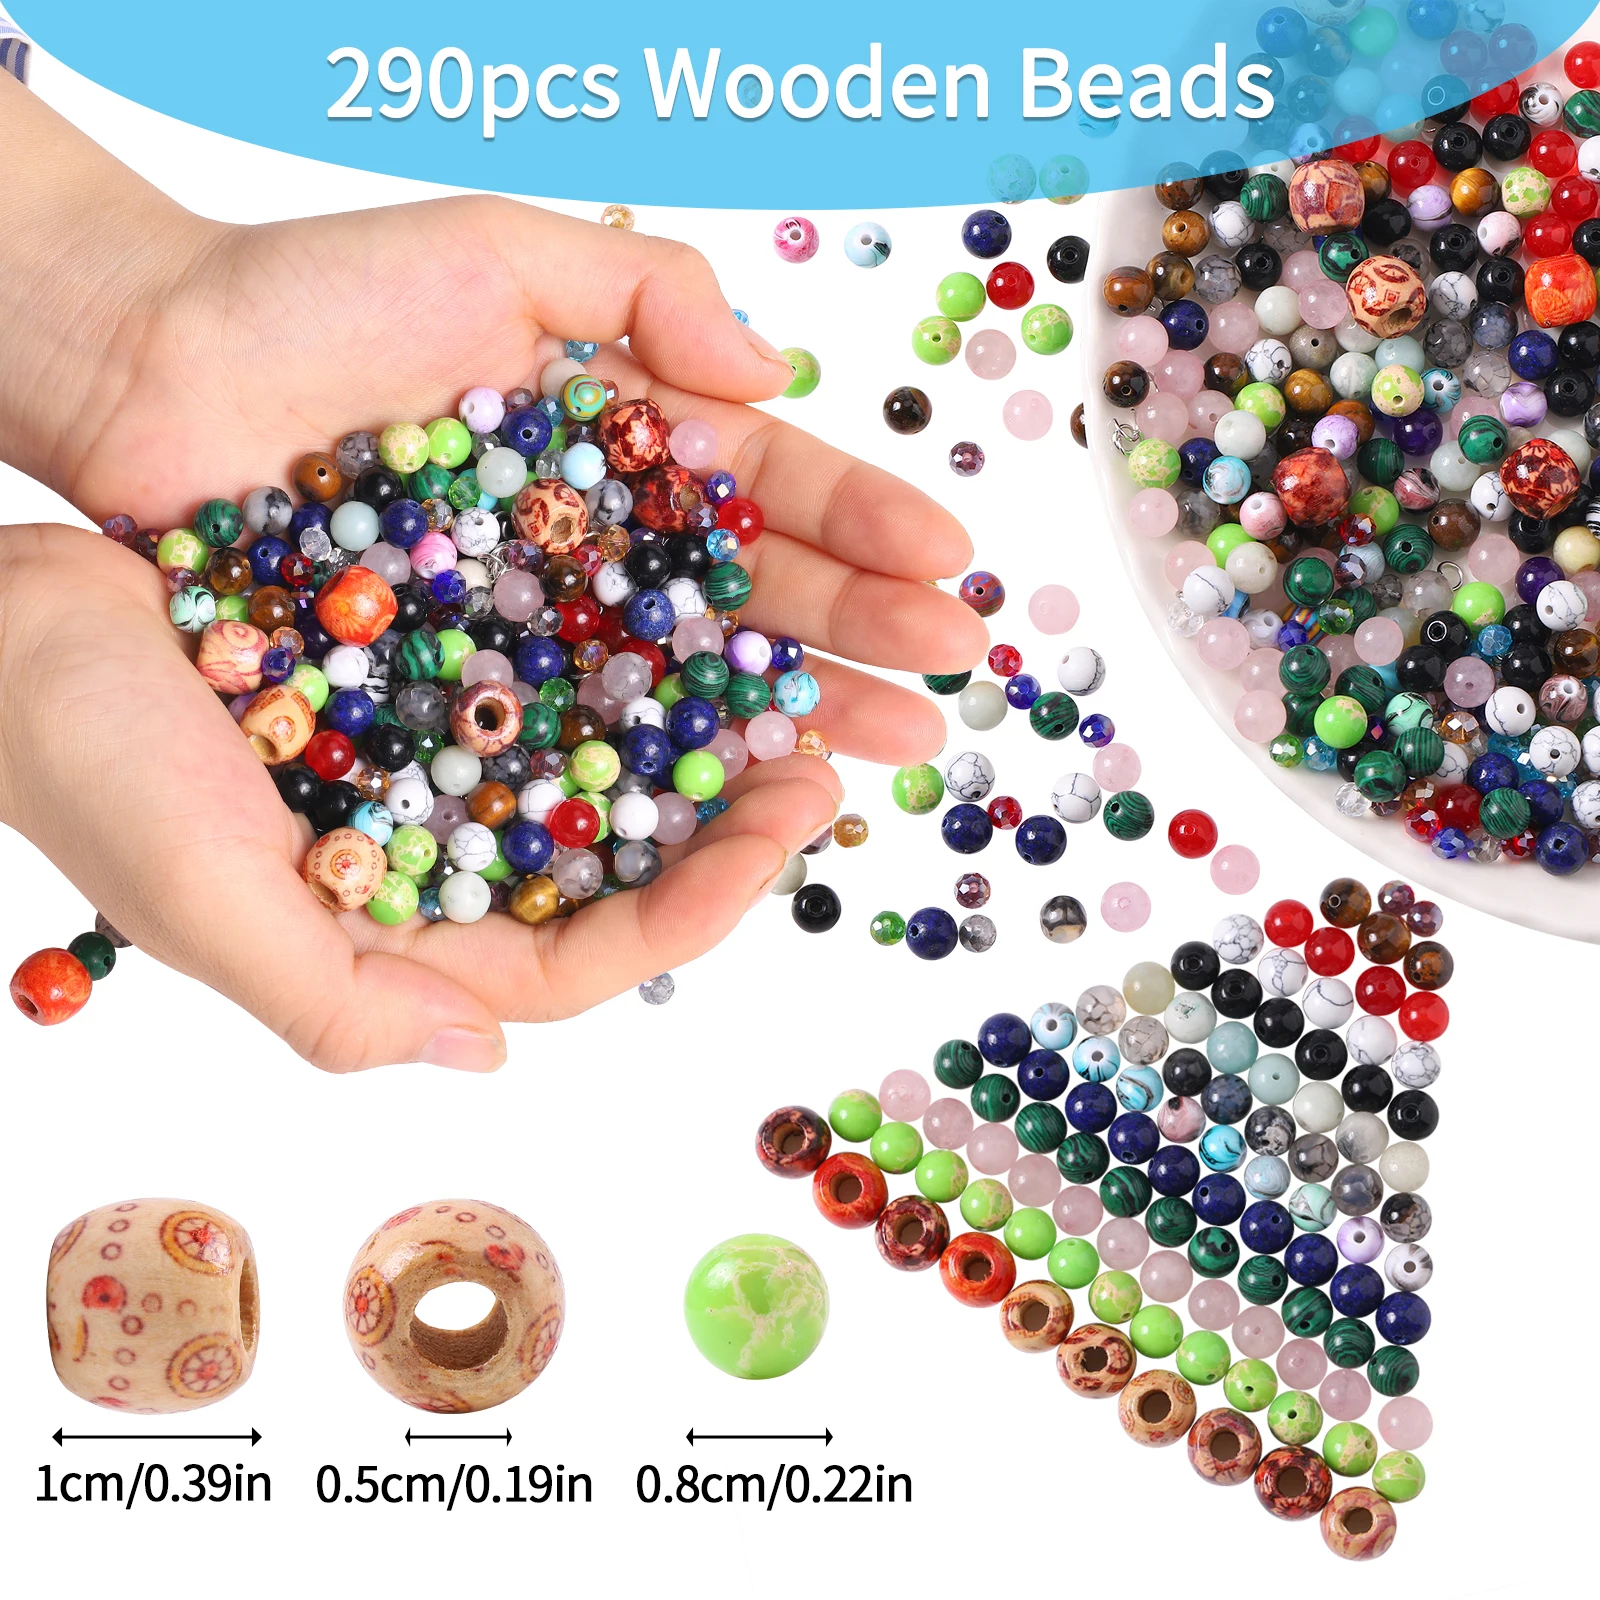 290pcs Wood Handmade DIY Mixed Alphabet Letter Beads send tools Charms Beads for Making Jewelry Handmade Bracelets Accessories 2x wood jewelry display necklace charms jewelry display tray pendant earrings card style pendant display card 3 slots